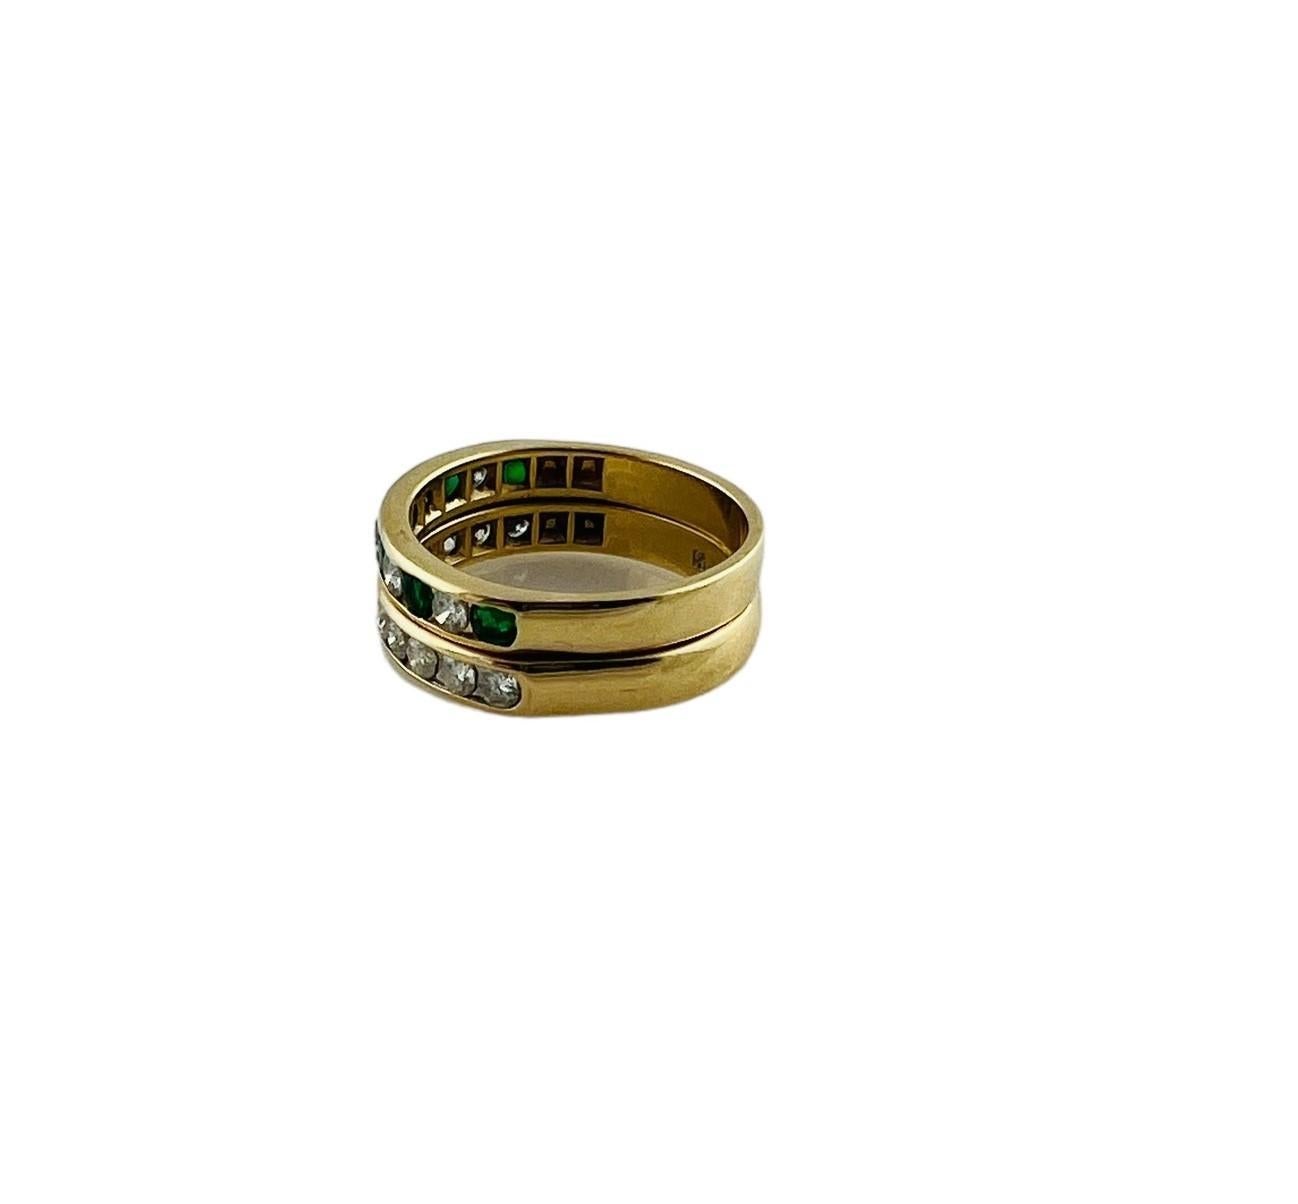 Vintage 14K Yellow Gold Diamond & Natural Emerald Double Band Ring Size 6.25

This beautiful piece features 2 bands that have been permanently smoldered together to create a gorgeous ring! The ring features 16 round brilliant cut diamonds and 6